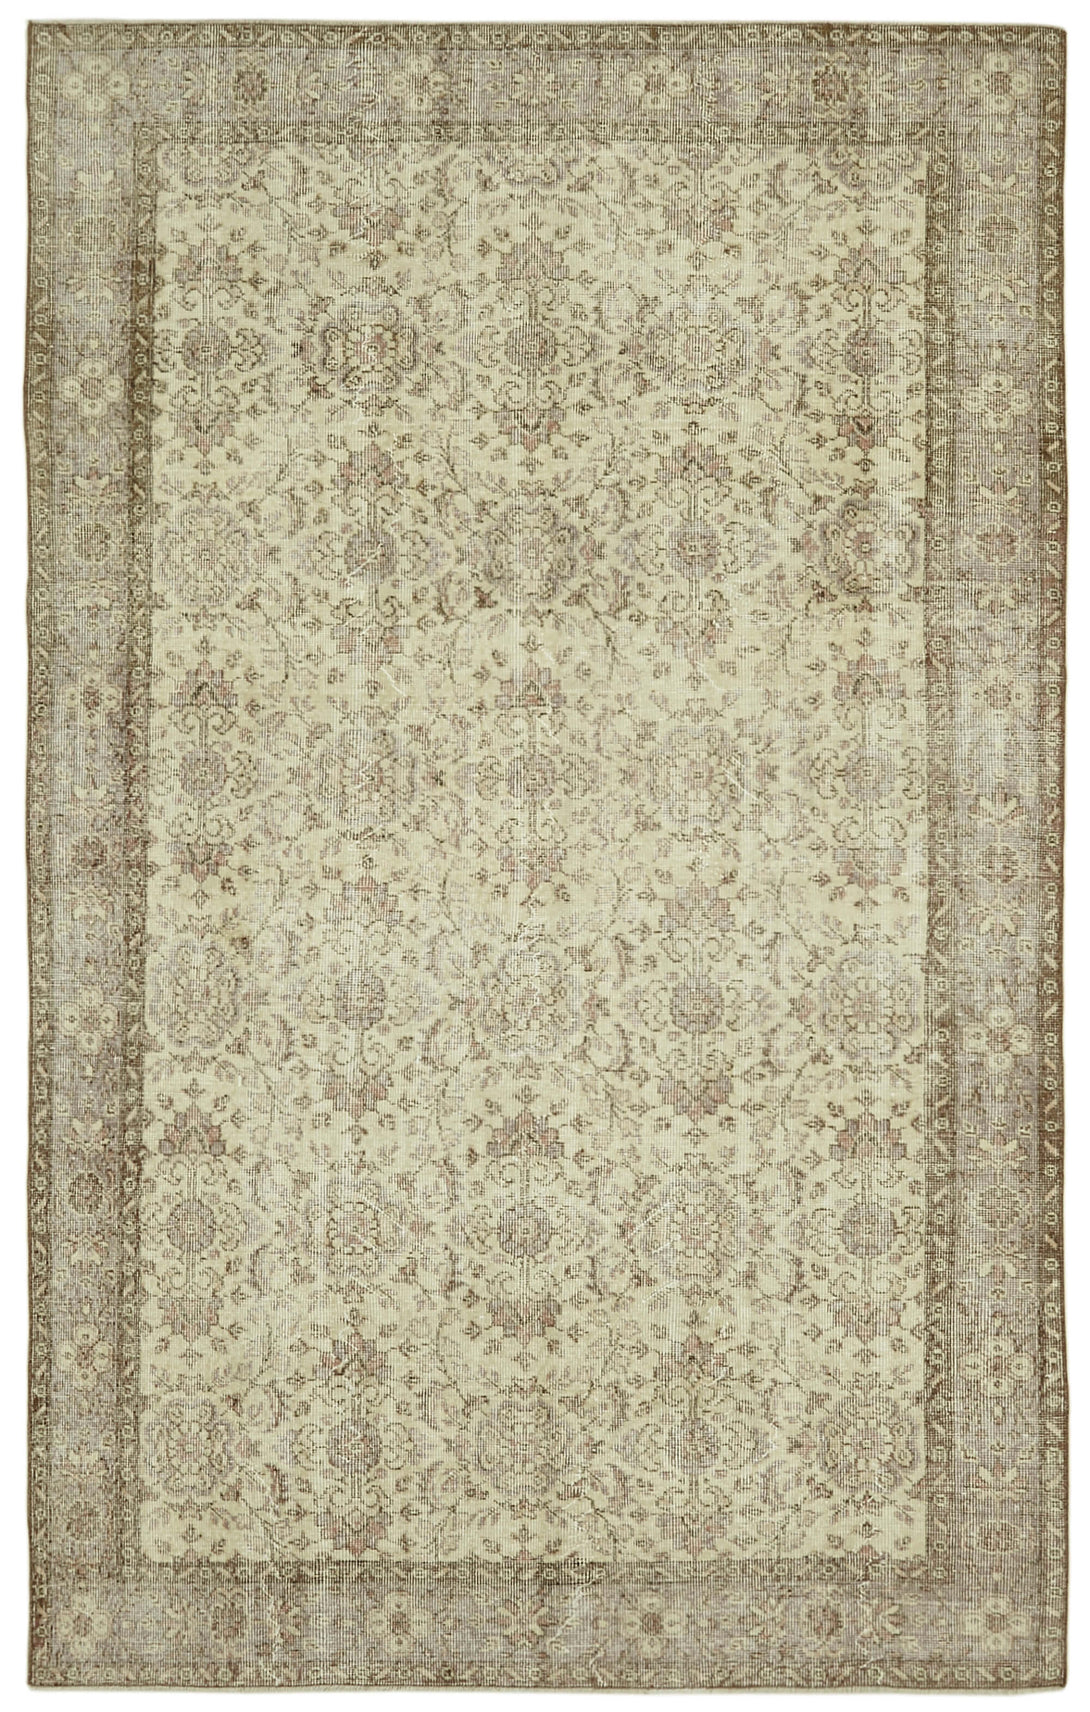 Handmade White Wash Area Rug > Design# OL-AC-41443 > Size: 5'-10" x 9'-5", Carpet Culture Rugs, Handmade Rugs, NYC Rugs, New Rugs, Shop Rugs, Rug Store, Outlet Rugs, SoHo Rugs, Rugs in USA